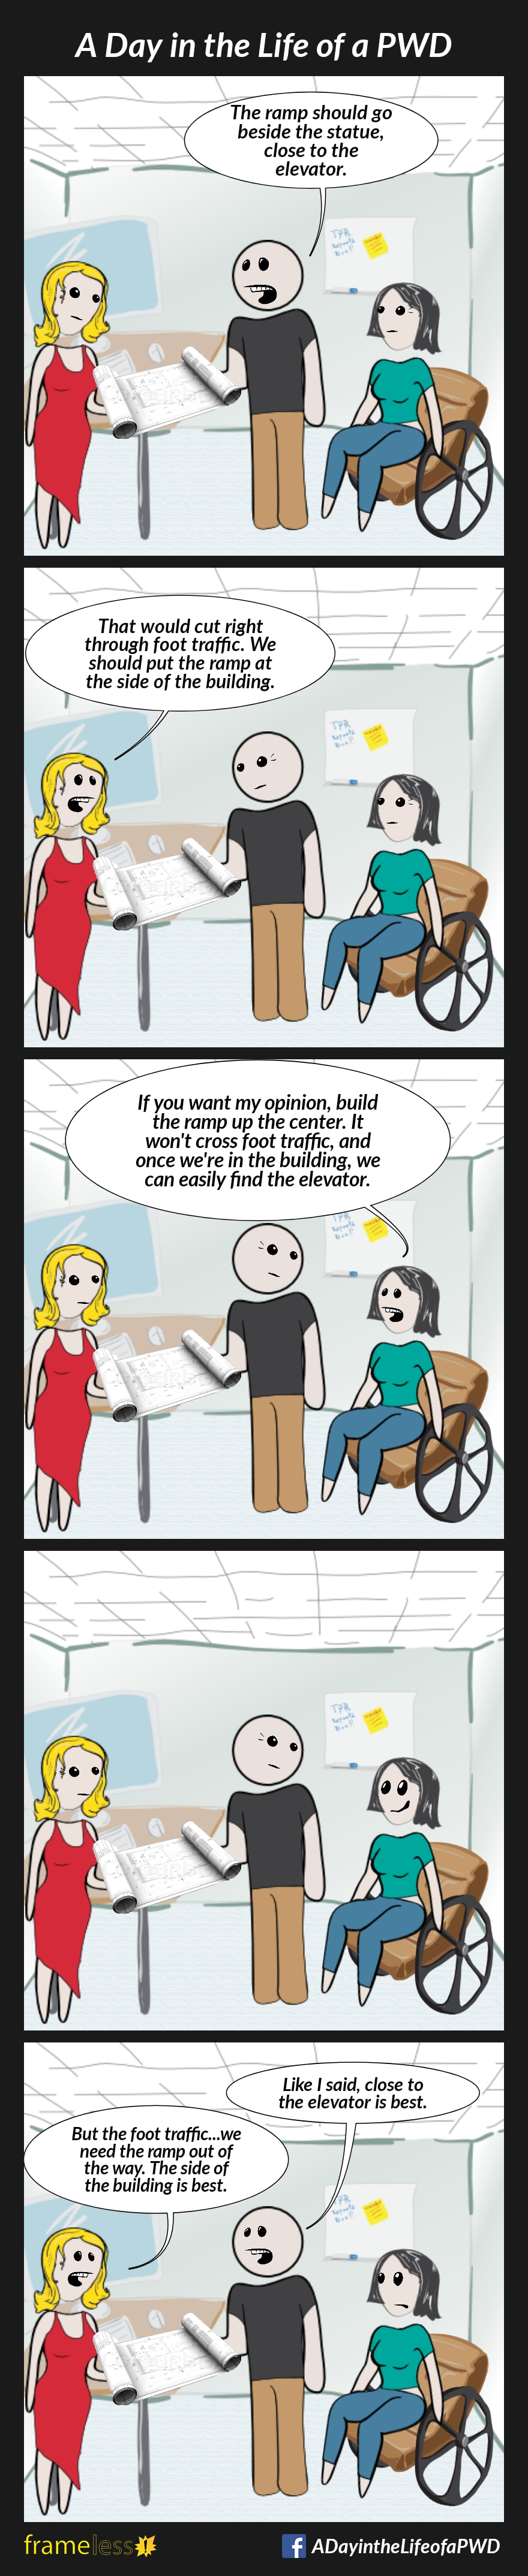 COMIC STRIP 
A Day in the Life of a PWD (Person With a Disability) 

Frame 1:
A woman in a wheelchair is in a classroom with a man and another woman. They are studying some blueprints.
MAN: The ramp should go beside the statue, close to the elevator.

Frame 2:
WOMAN: That would cut right through foot traffic. We should put the ramp at the side of the building.

Frame 3:
WHEELCHAIR USER: If you want my opinion, build the ramp up the center. It won't cross foot traffic, and once we're in the building, we can easily find the elevator. 

Frame 4:
The man and woman pause for a moment, staring at the wheelchair user.

Frame 5:
MAN (to woman): Like I said, close to the elevator is best.
WOMAN: But the foot traffic...We need the ramp out of the way. The side of the building is best.